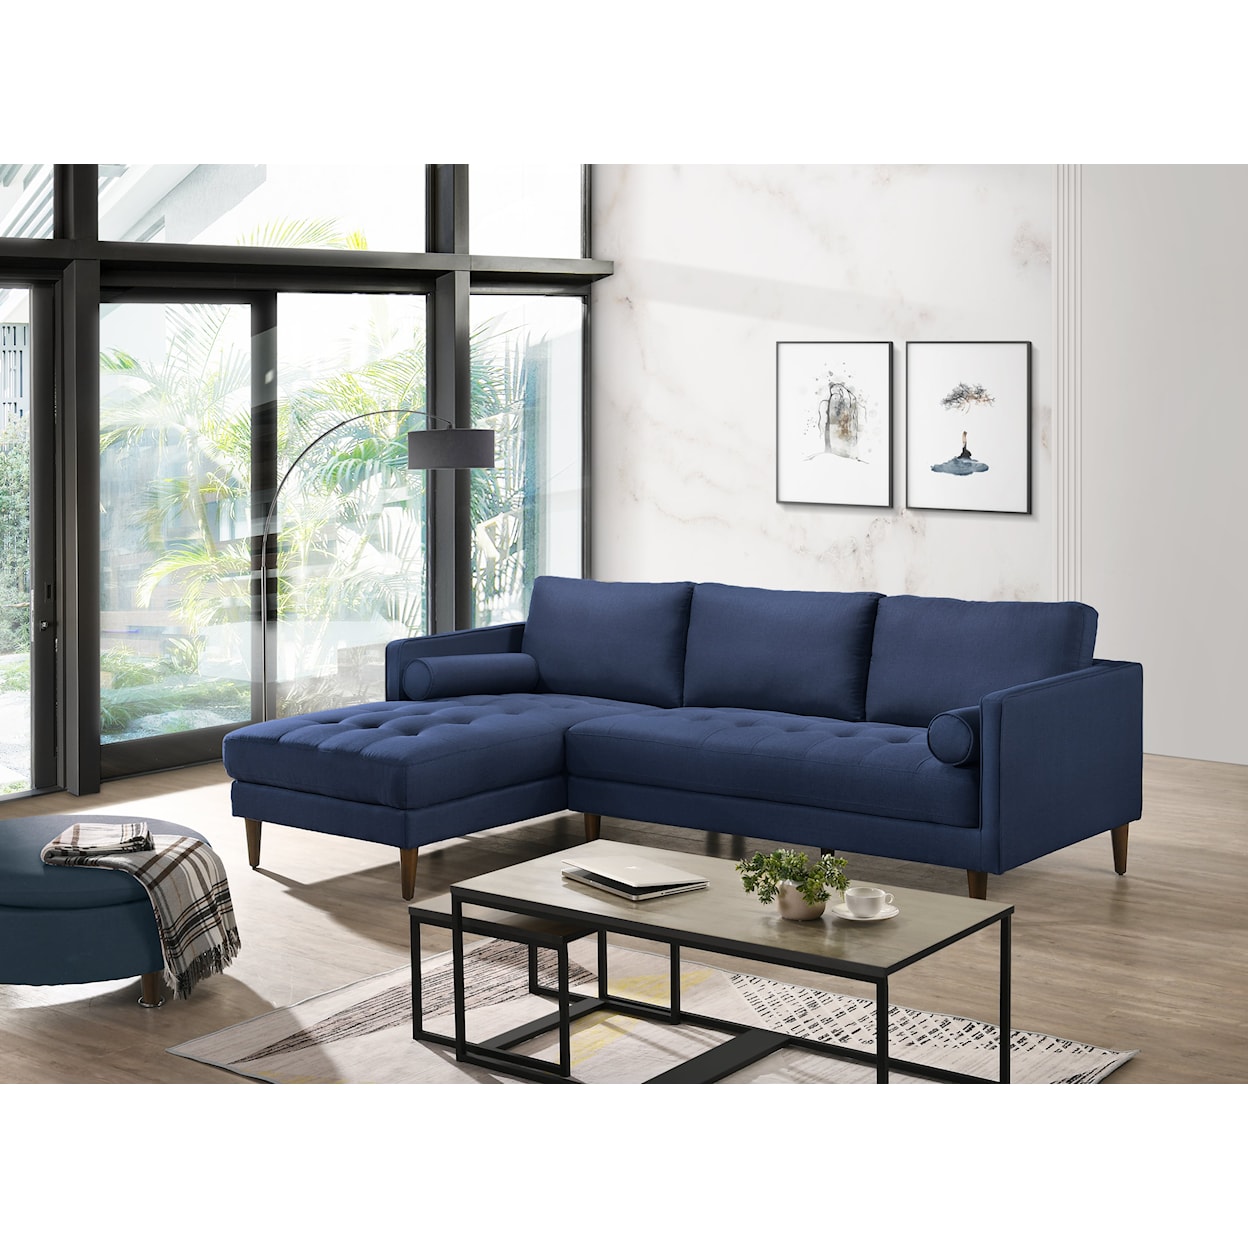 Elements International Sampson 2 Piece Chaise Sectional